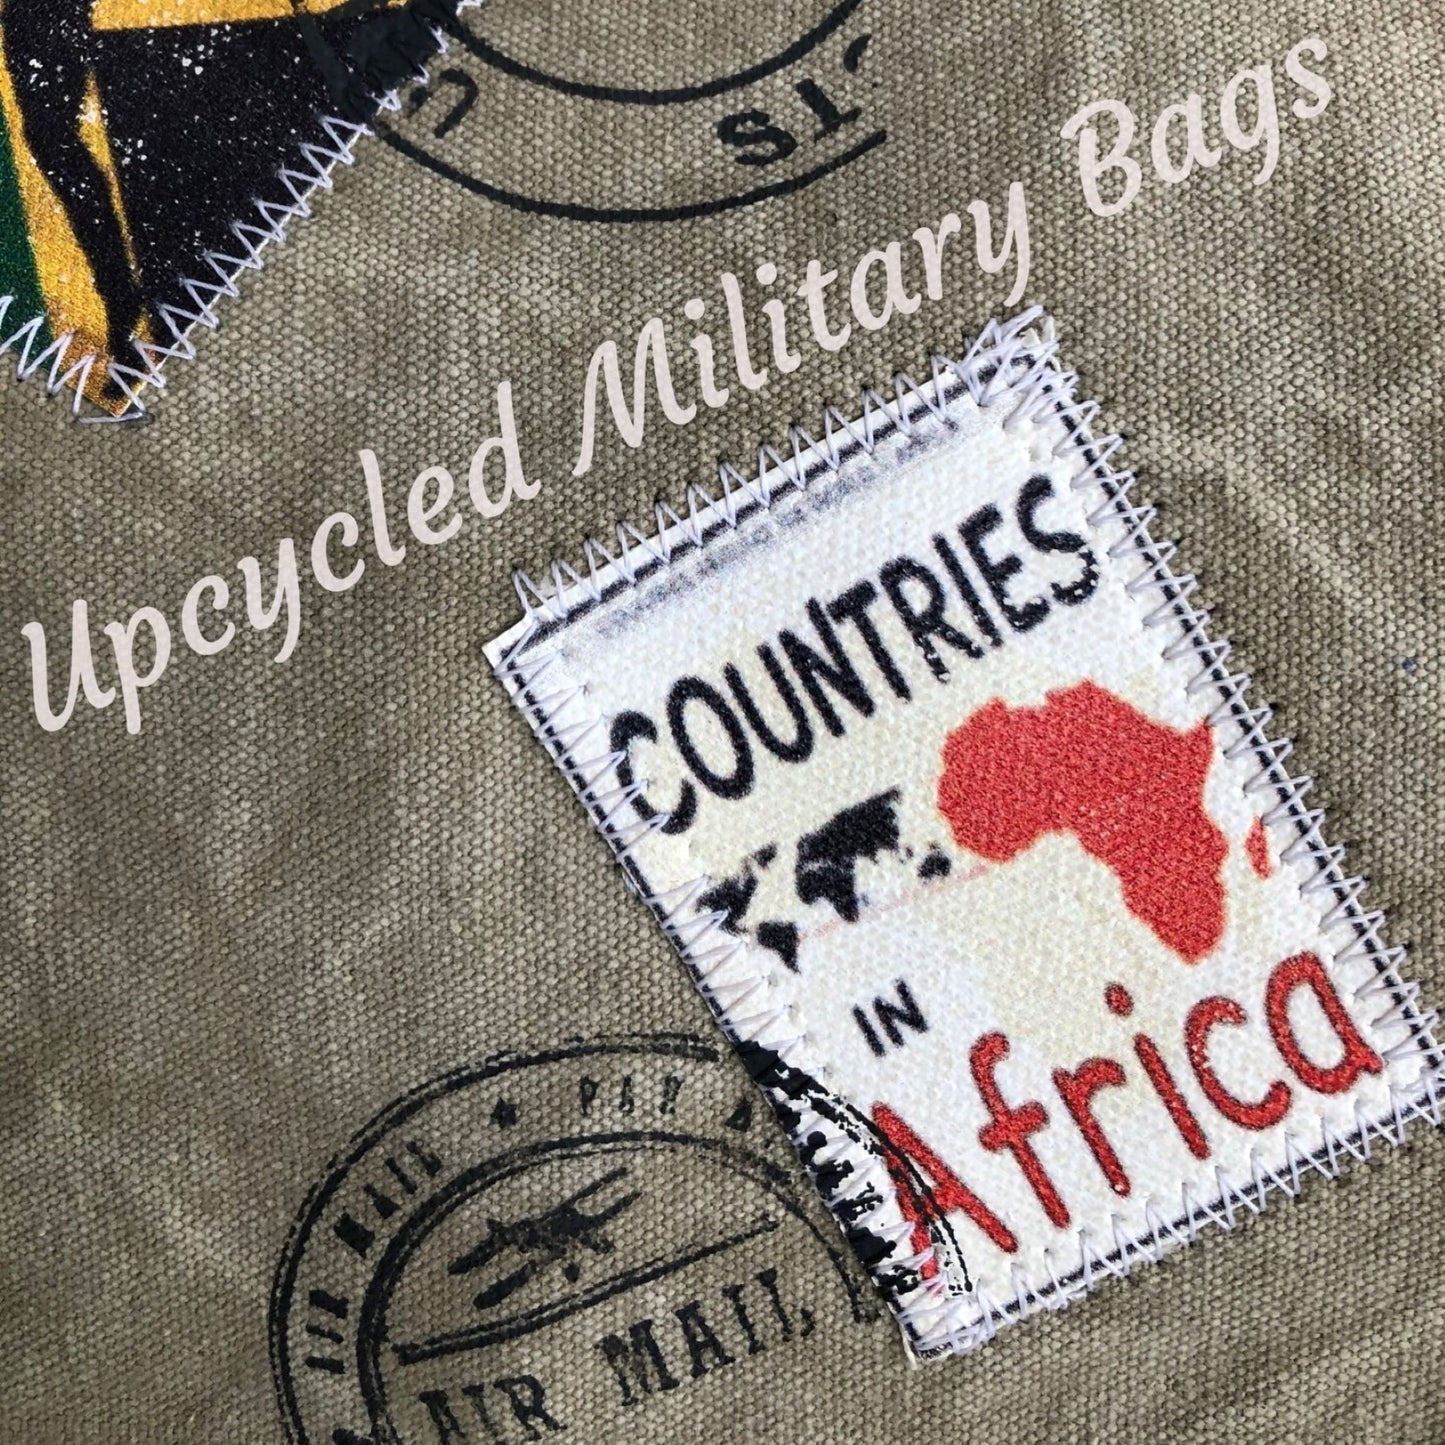 The UpCycled Travel Stamp Backpack is upcycled, crafted from re-purposed military tents, tarps and canvas. Vintage inspired with patches of travel stamps: USA, Africa, Denmark and more. Sturdy heavy canvas on this medium sized backpack. Tan with brown accents. Features include: FRONT MAGNETIC CLOSURE, ZIP TOP CLOSURE, Dimensions are 13" x 13.5" X 4", FRONT POCKET, BACK ZIPPED POCKET FULLY LINED, 1 ZIPPED INSIDE POCKET, ADJUSTABLE STRAP.